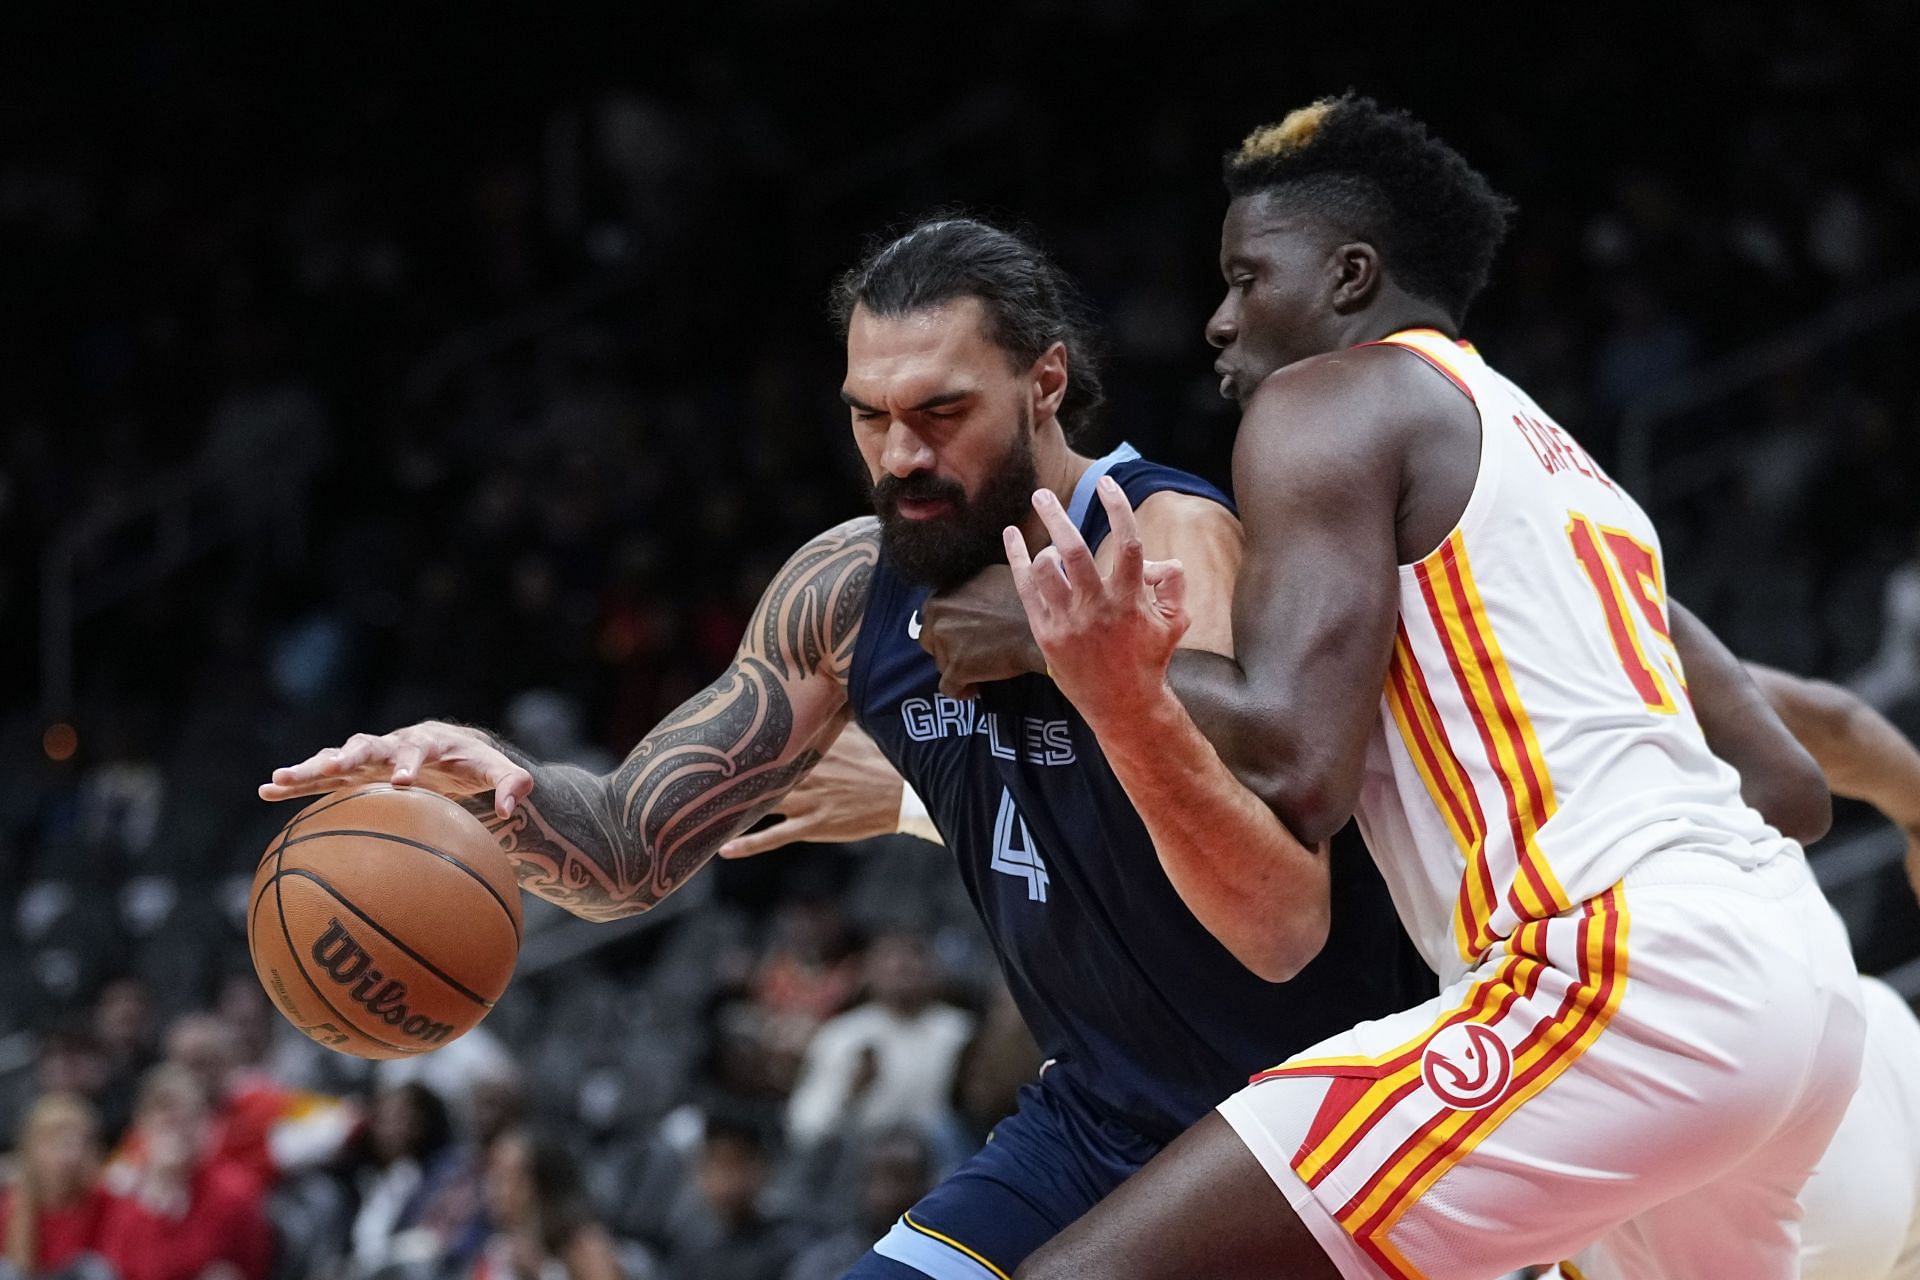 Steven Adams injury: Grizzlies suffer another blow with big man likely to  miss rest of regular season 